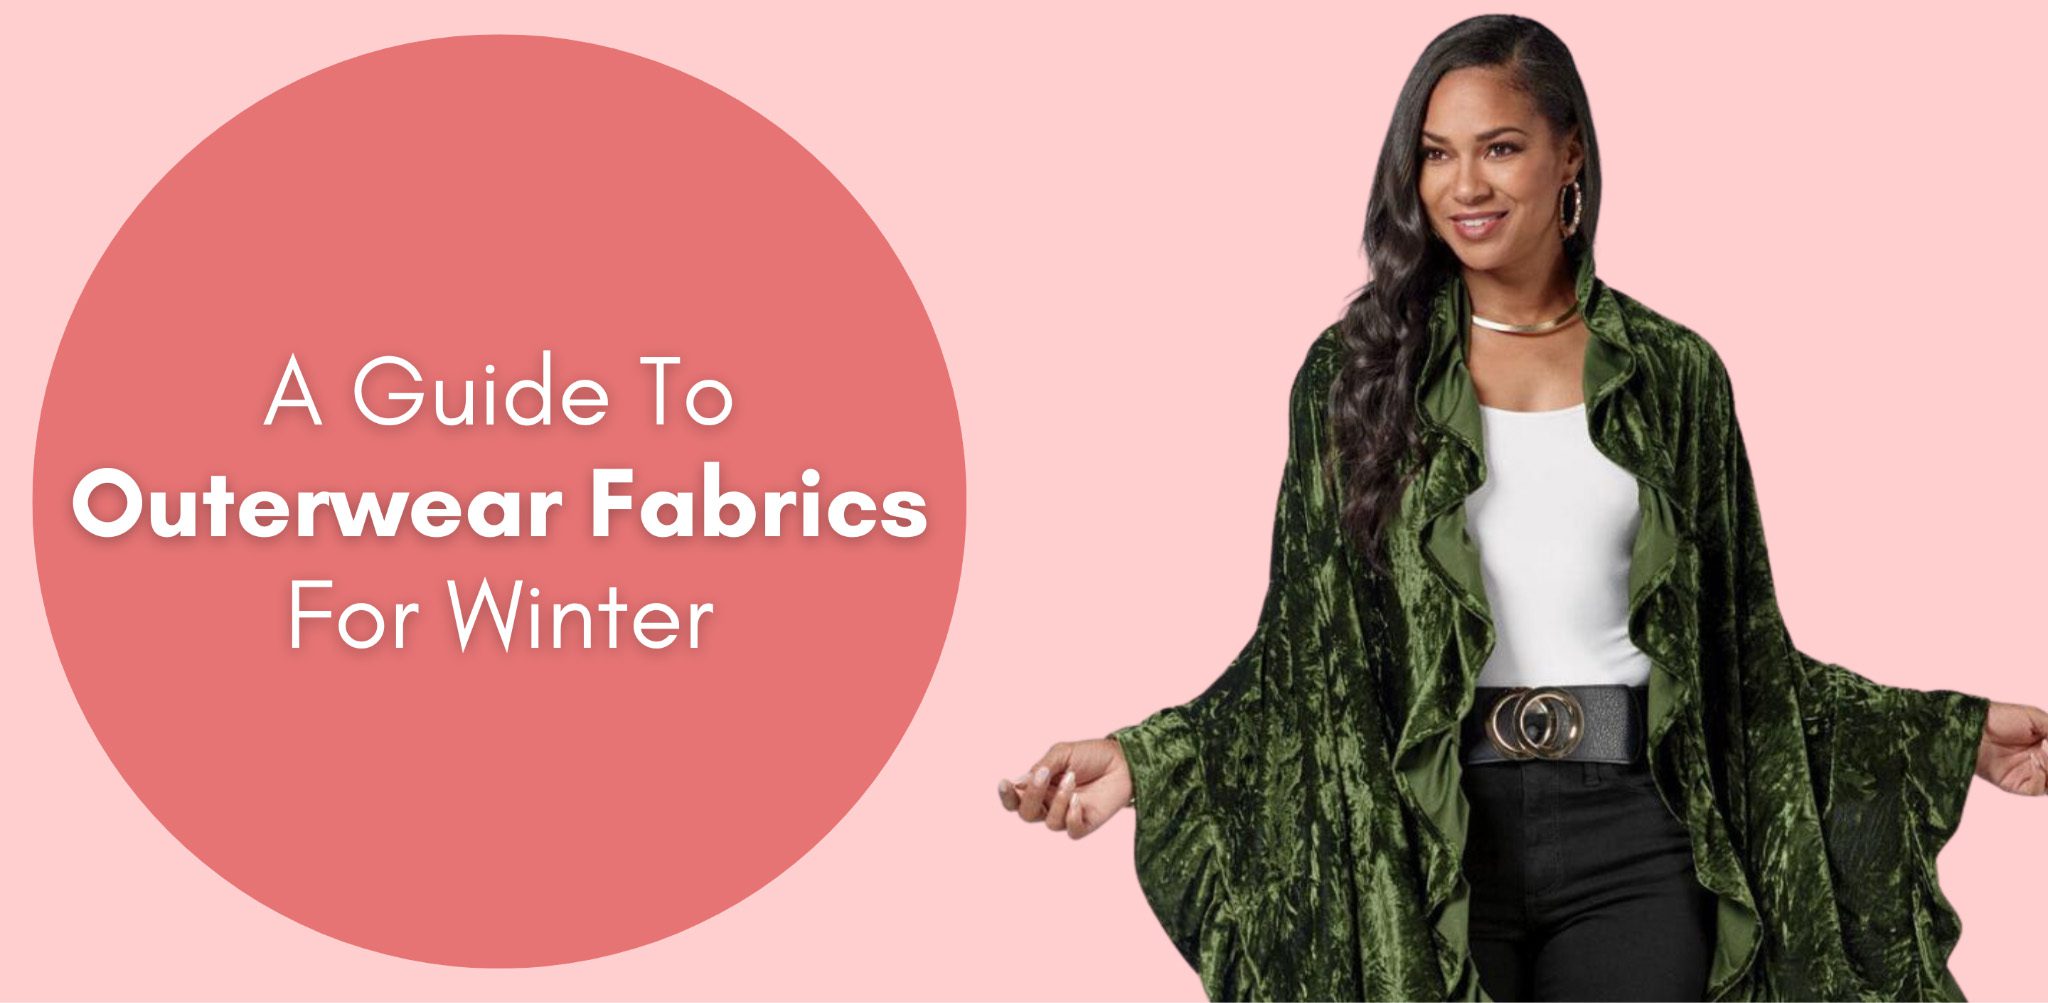 A Guide To Outerwear Fabrics For Winter